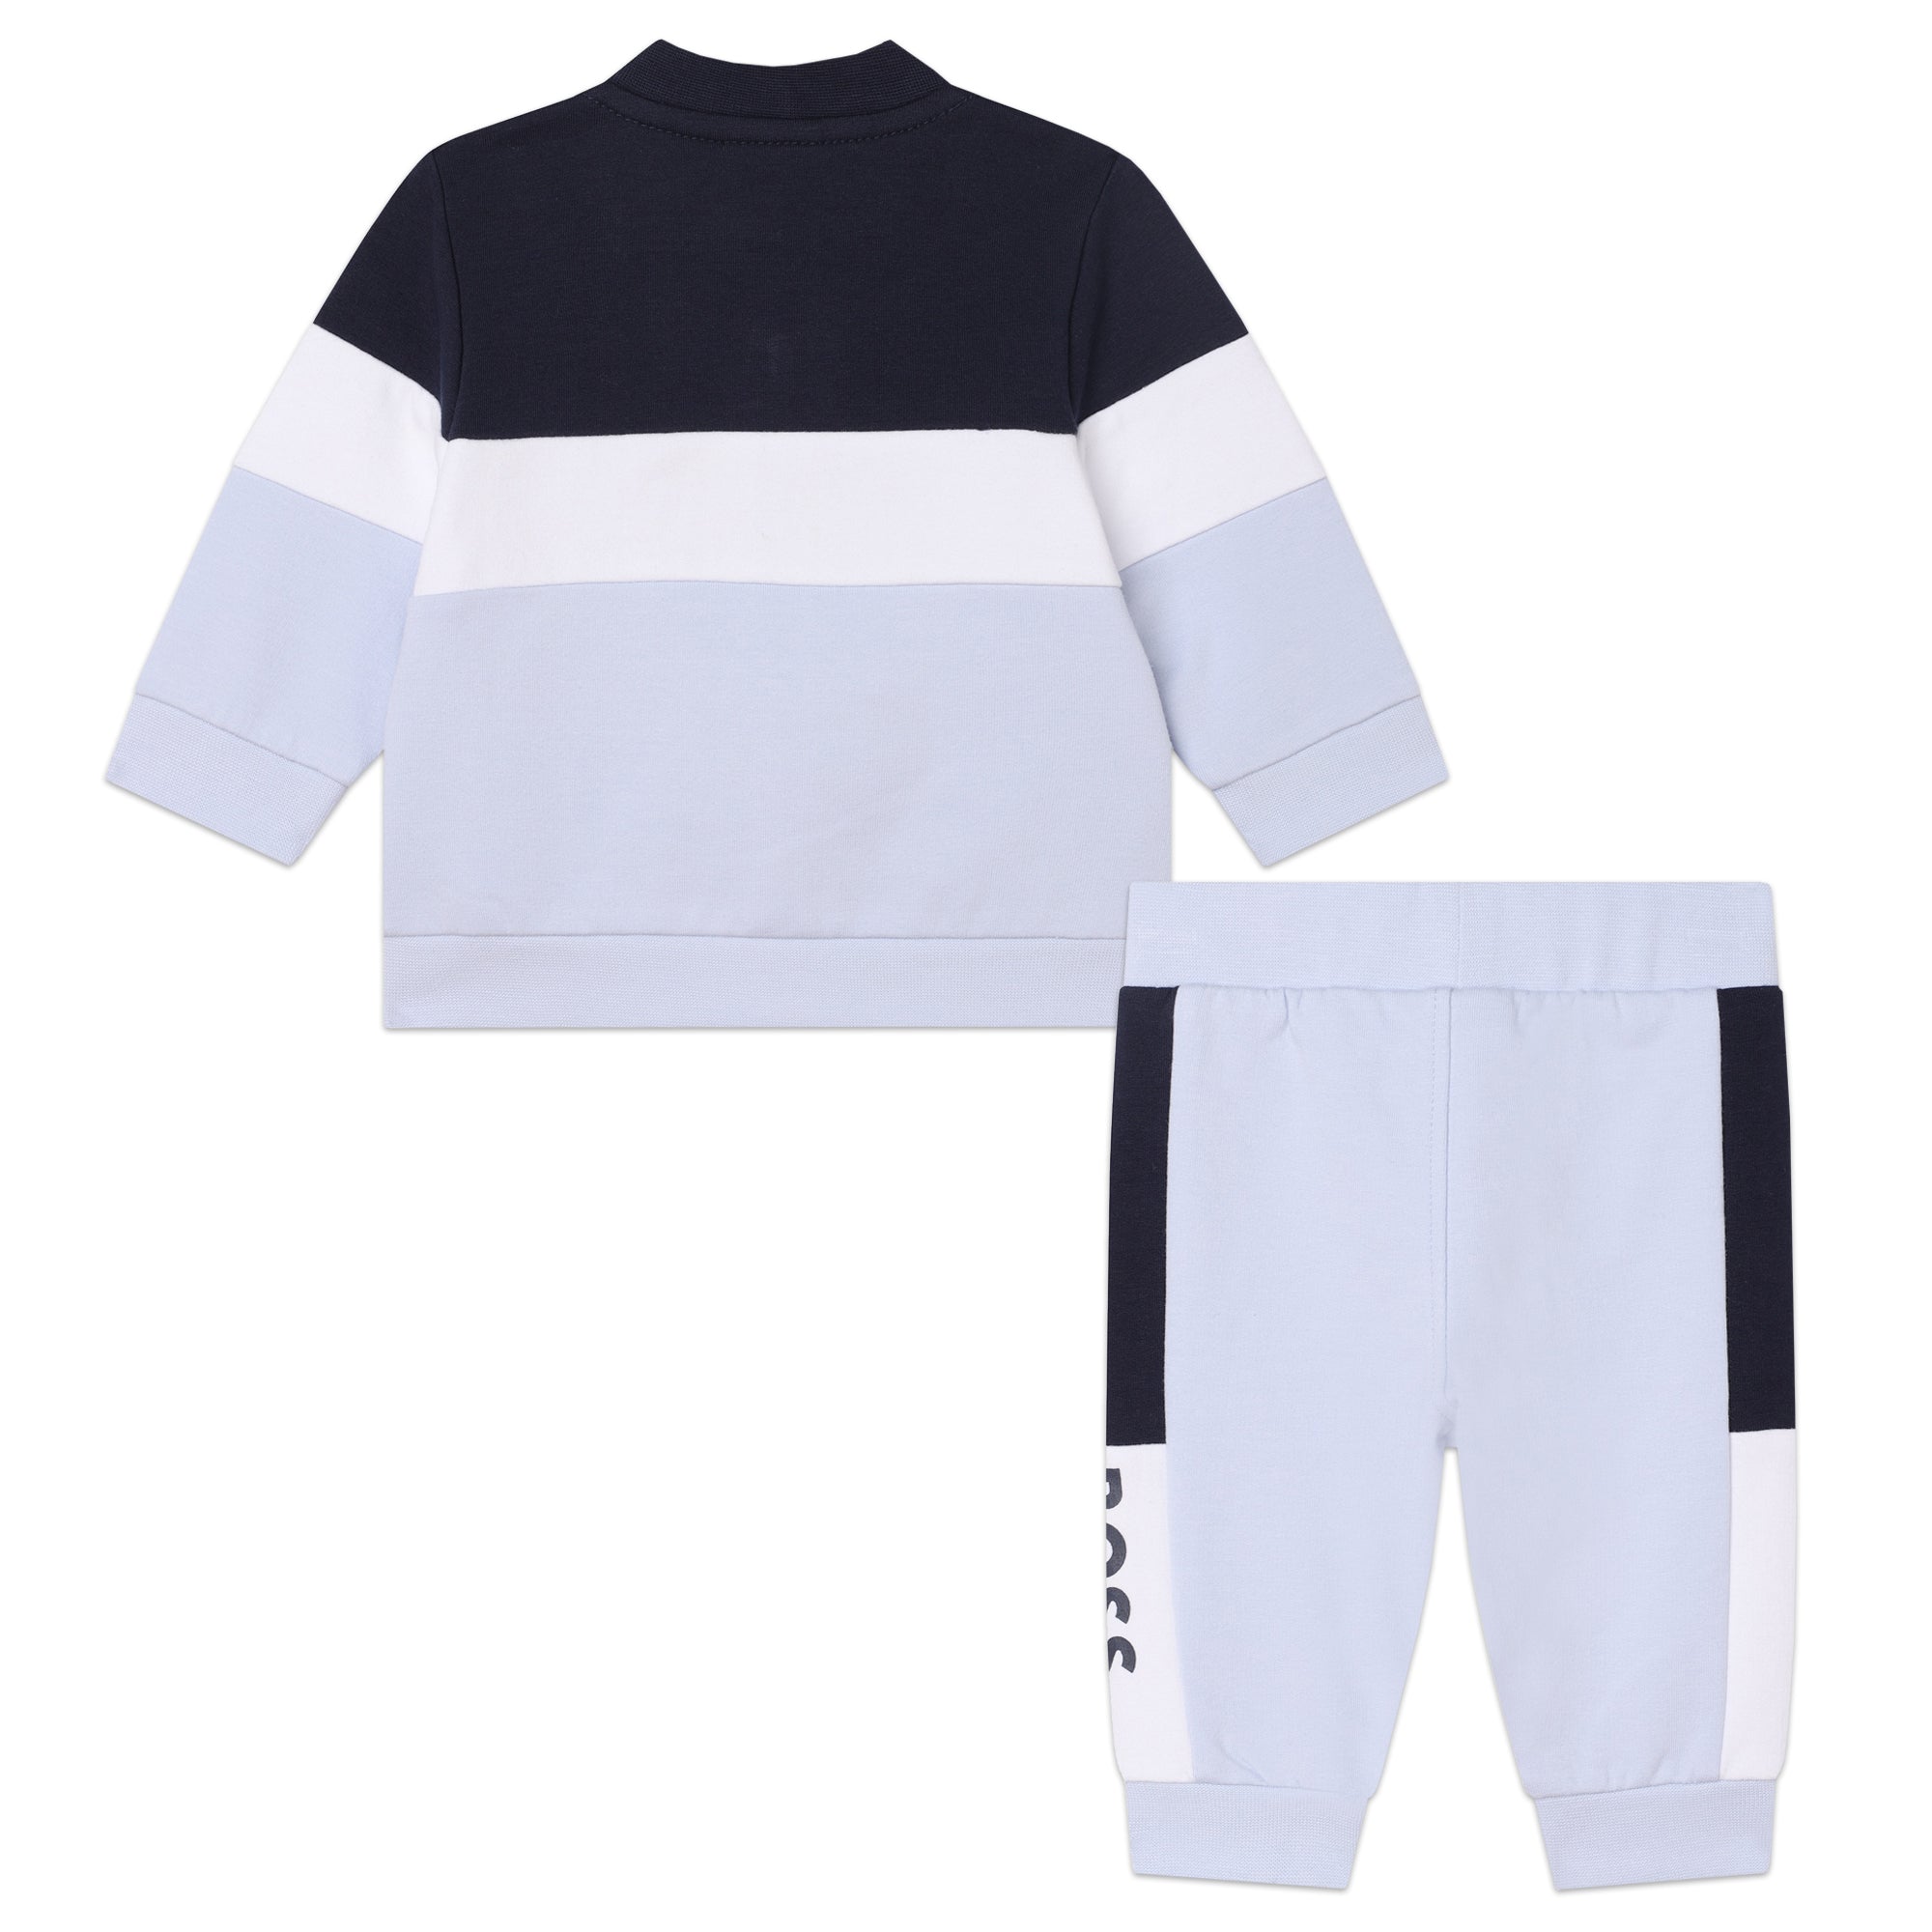 Boss Baby Boys Tracksuit Zip Top and Pants Set in Pale Blue